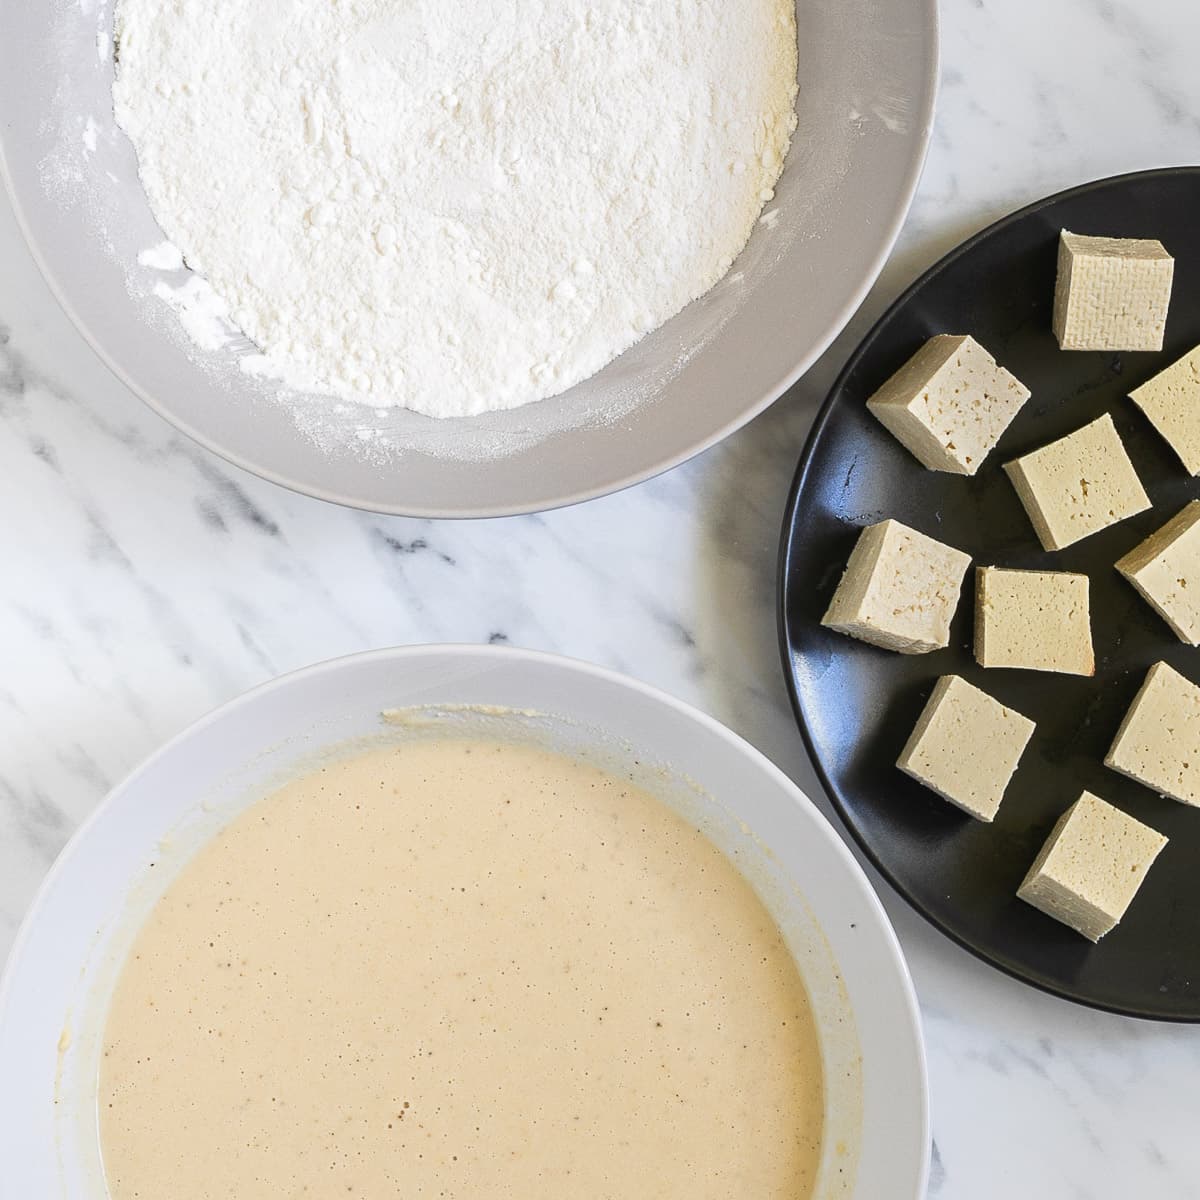 One white bowl of white flour, one white bowl of light yellow batter and one black bowl of tofu cubes.